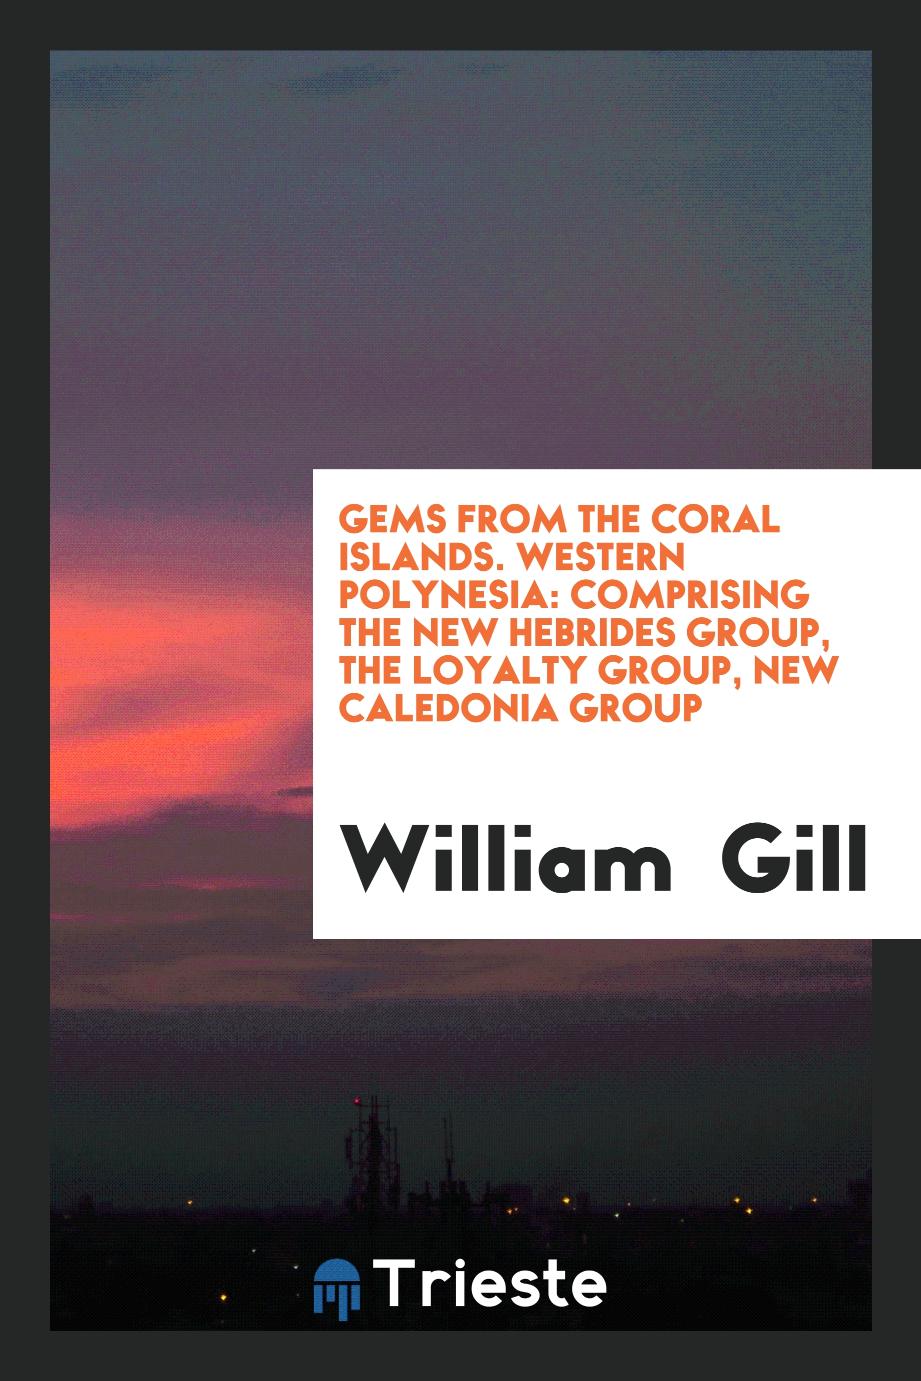 Gems from the Coral Islands. Western Polynesia: Comprising the New Hebrides Group, the Loyalty Group, New Caledonia Group